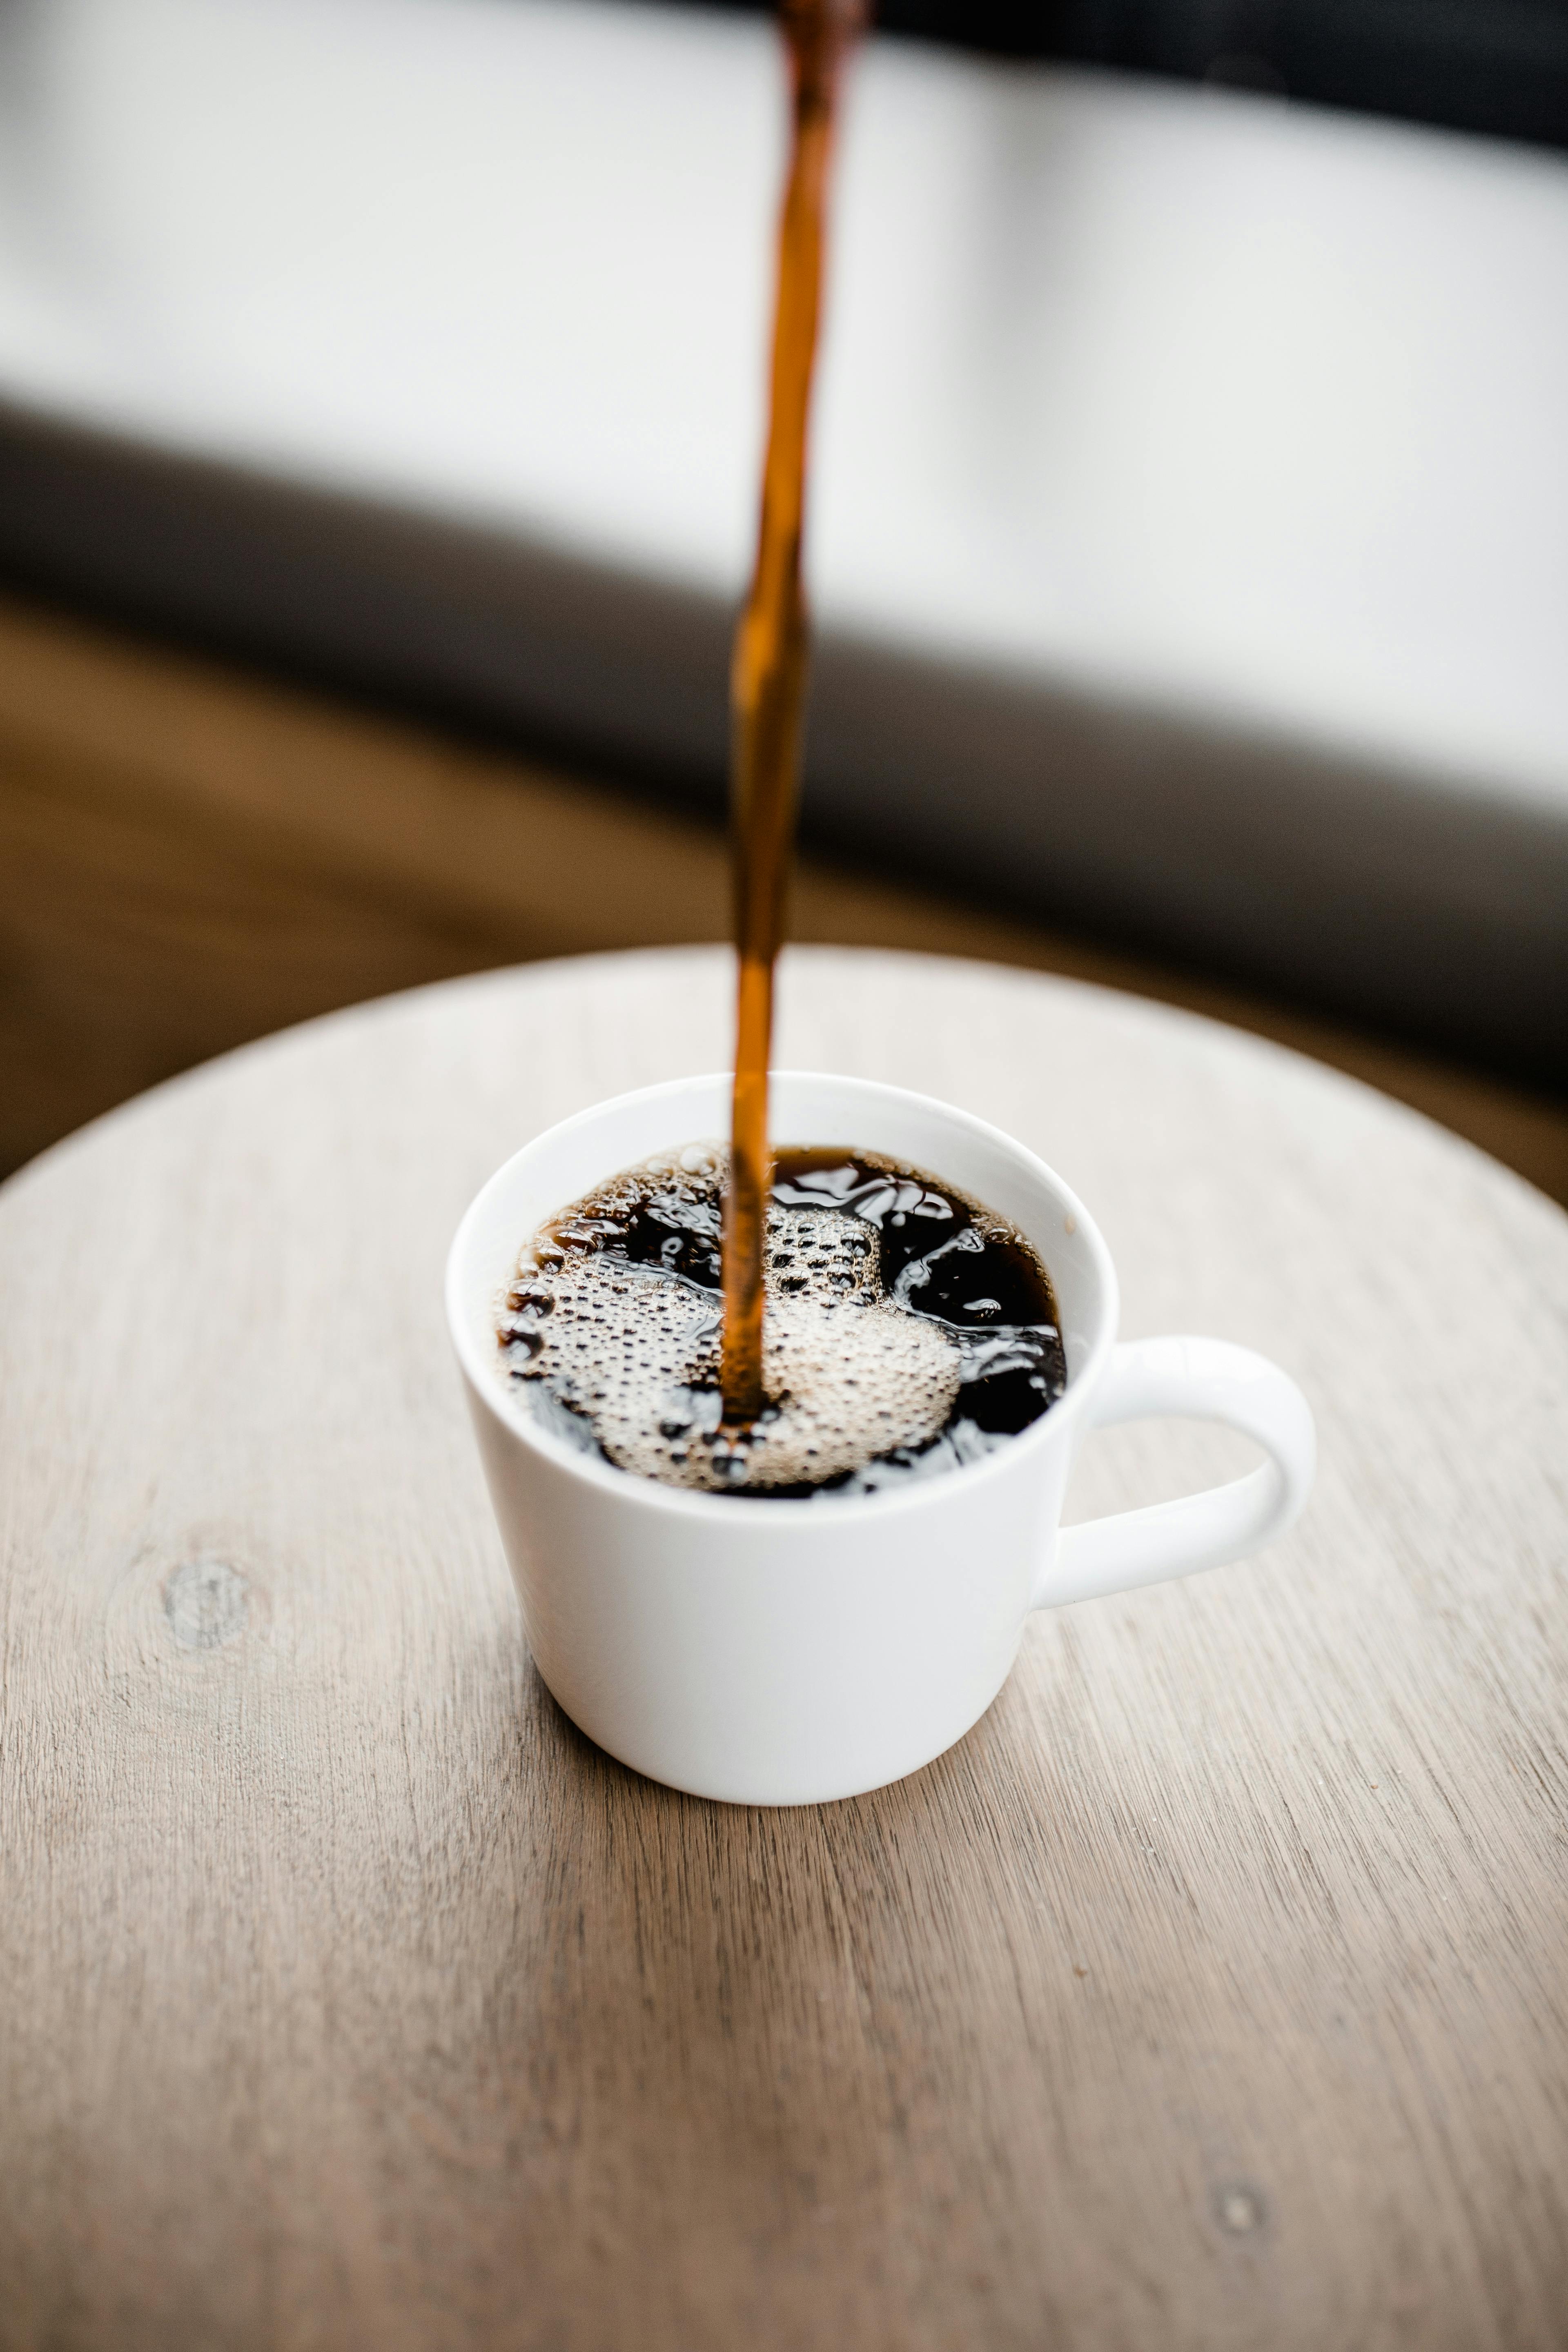 A cup of coffee. For illustration purposes only | Source: Pexels